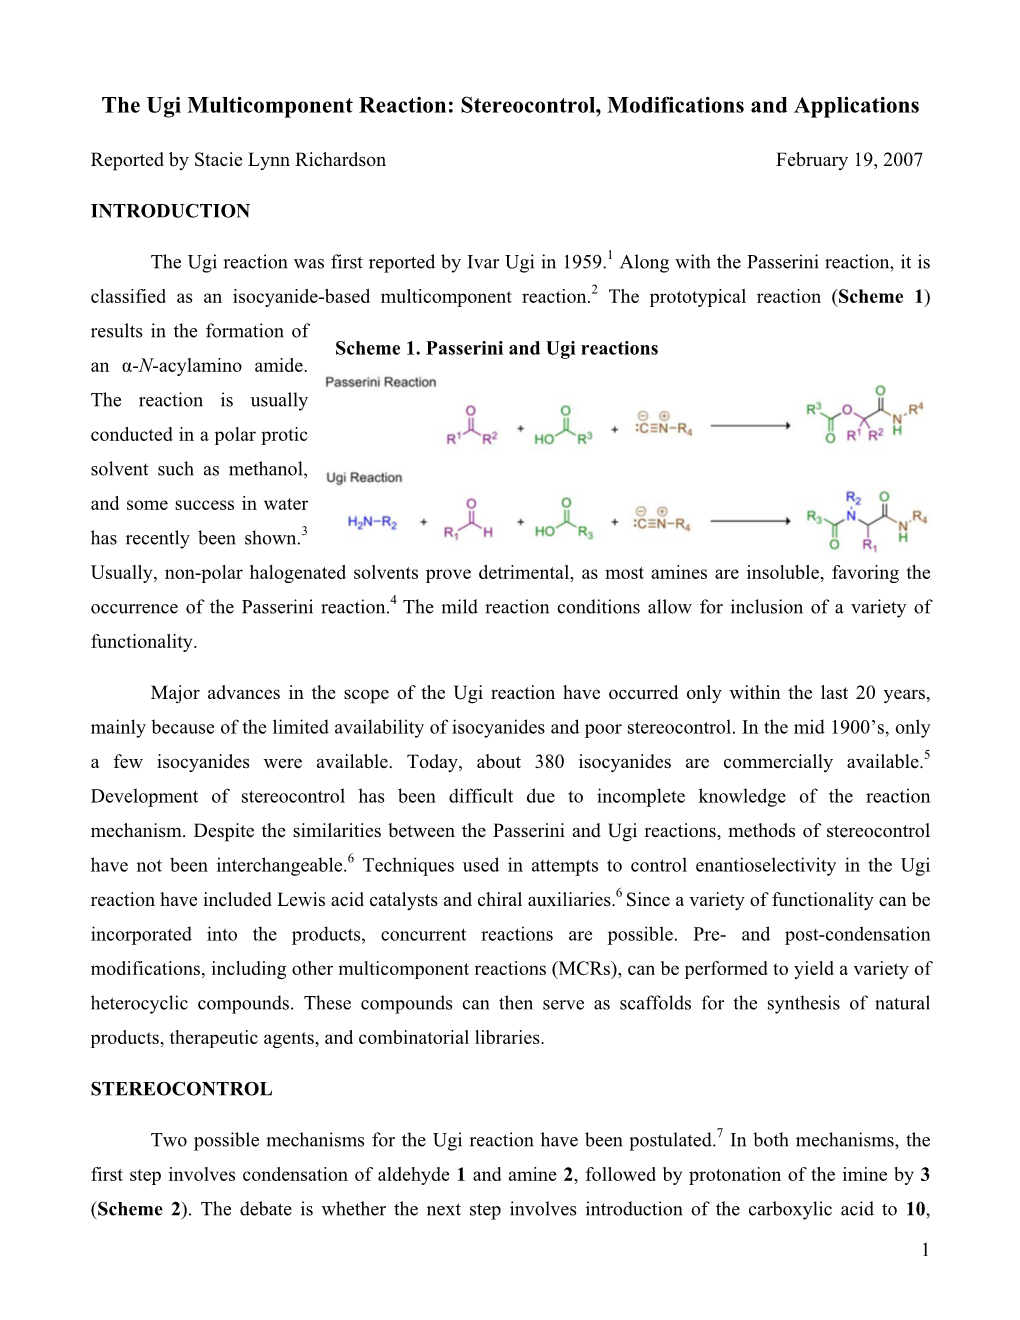 The Ugi Multicomponent Reaction: Stereocontrol, Modifications and Applications